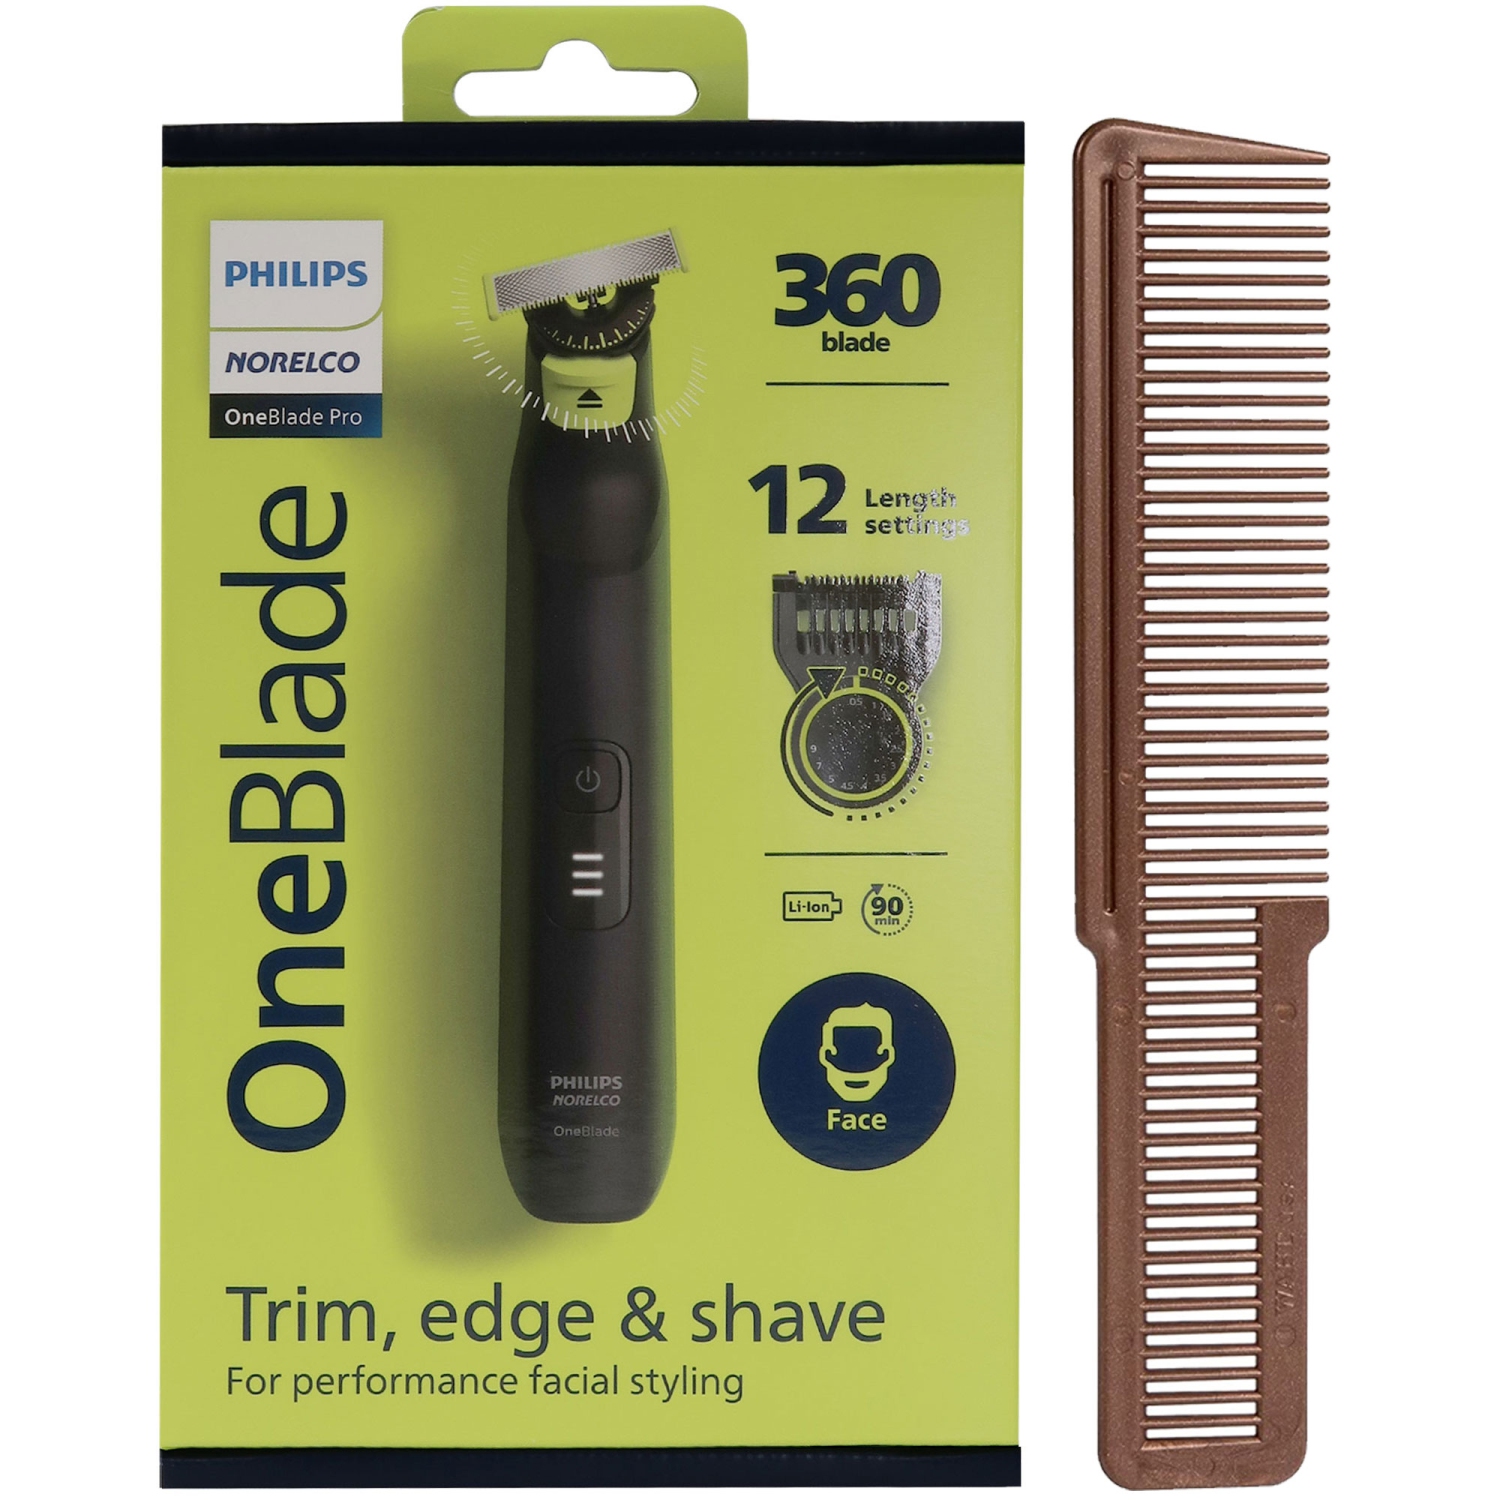 Philips Norelco OneBlade 360 Electric Trimmer QP6531/70 with Wahl Styling Comb